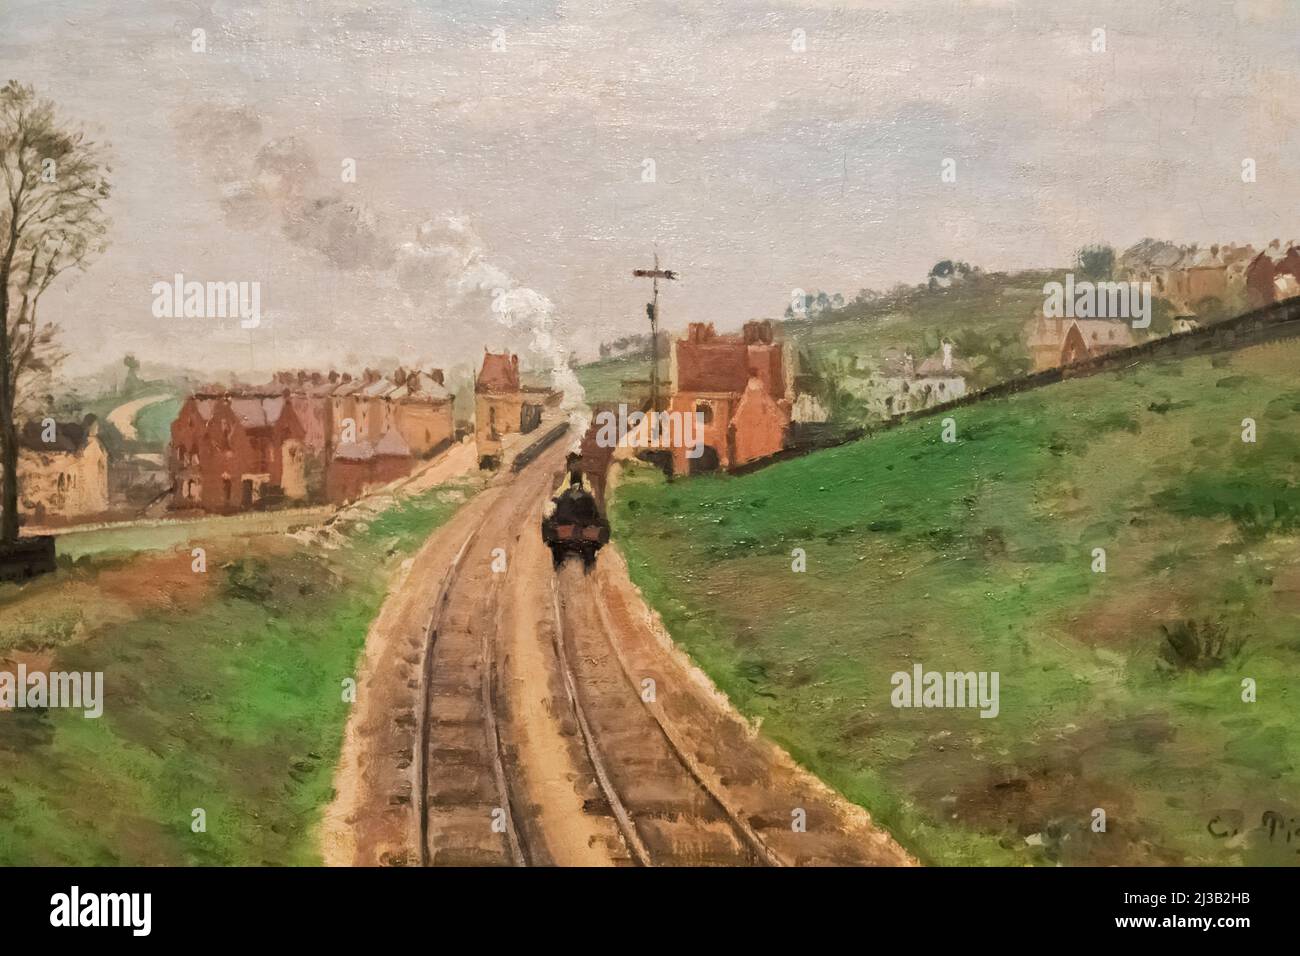 Inghilterra, Londra, Somerset House, The Courtauld Gallery, dipinto dal titolo 'Lordship Lane Station, Dulwich' di Camille Pissarro datato 1871 Foto Stock